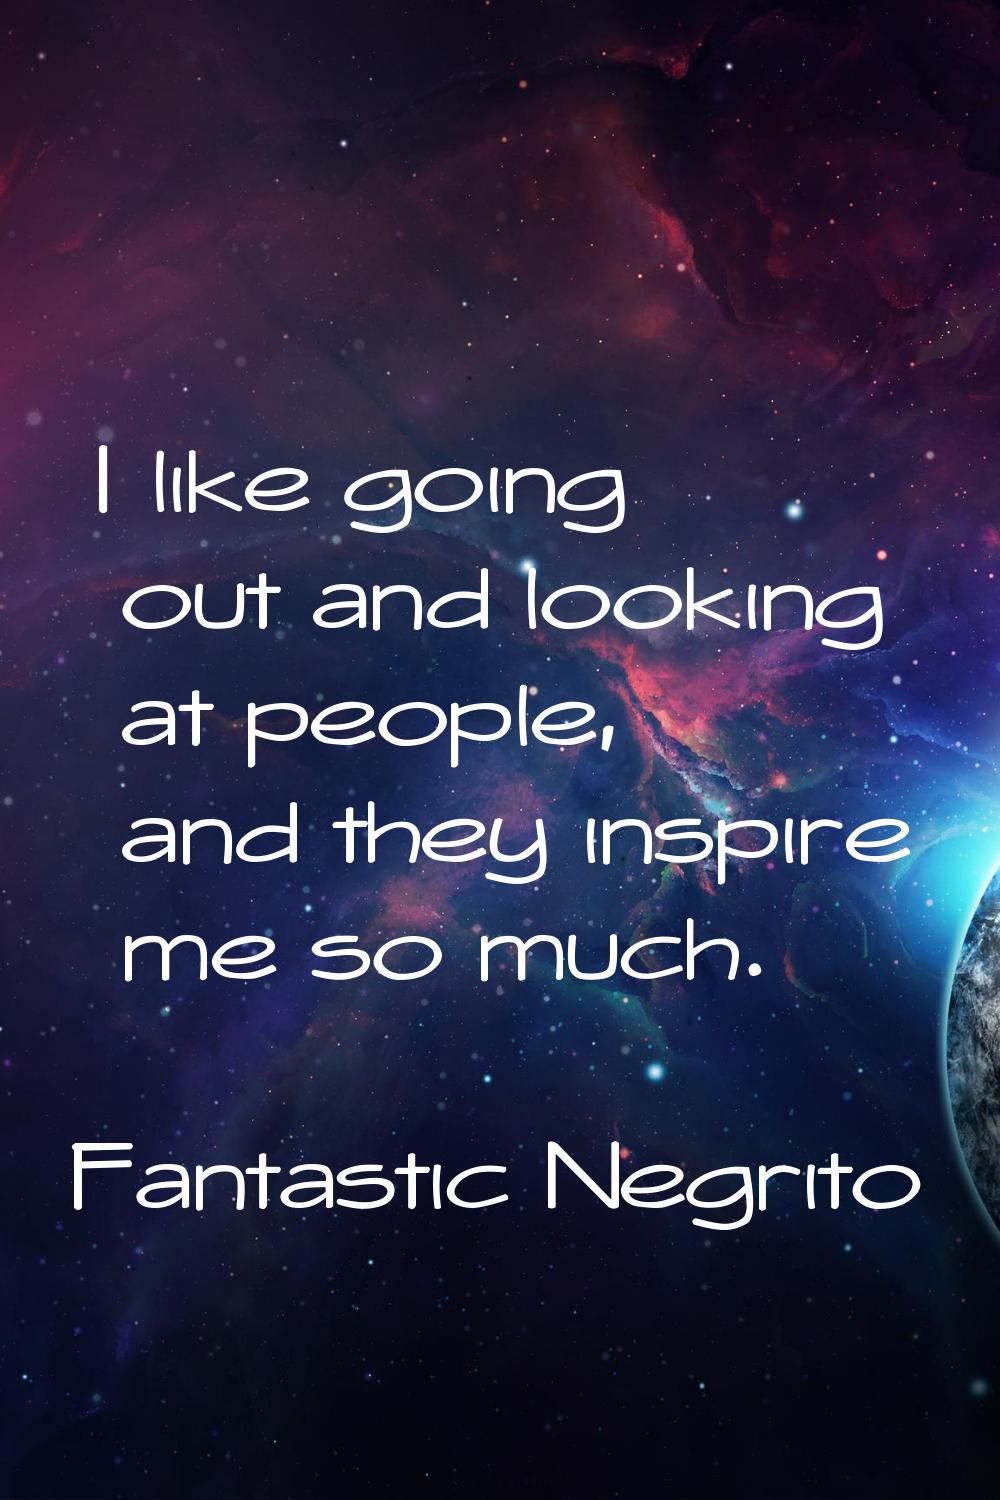 I like going out and looking at people, and they inspire me so much.